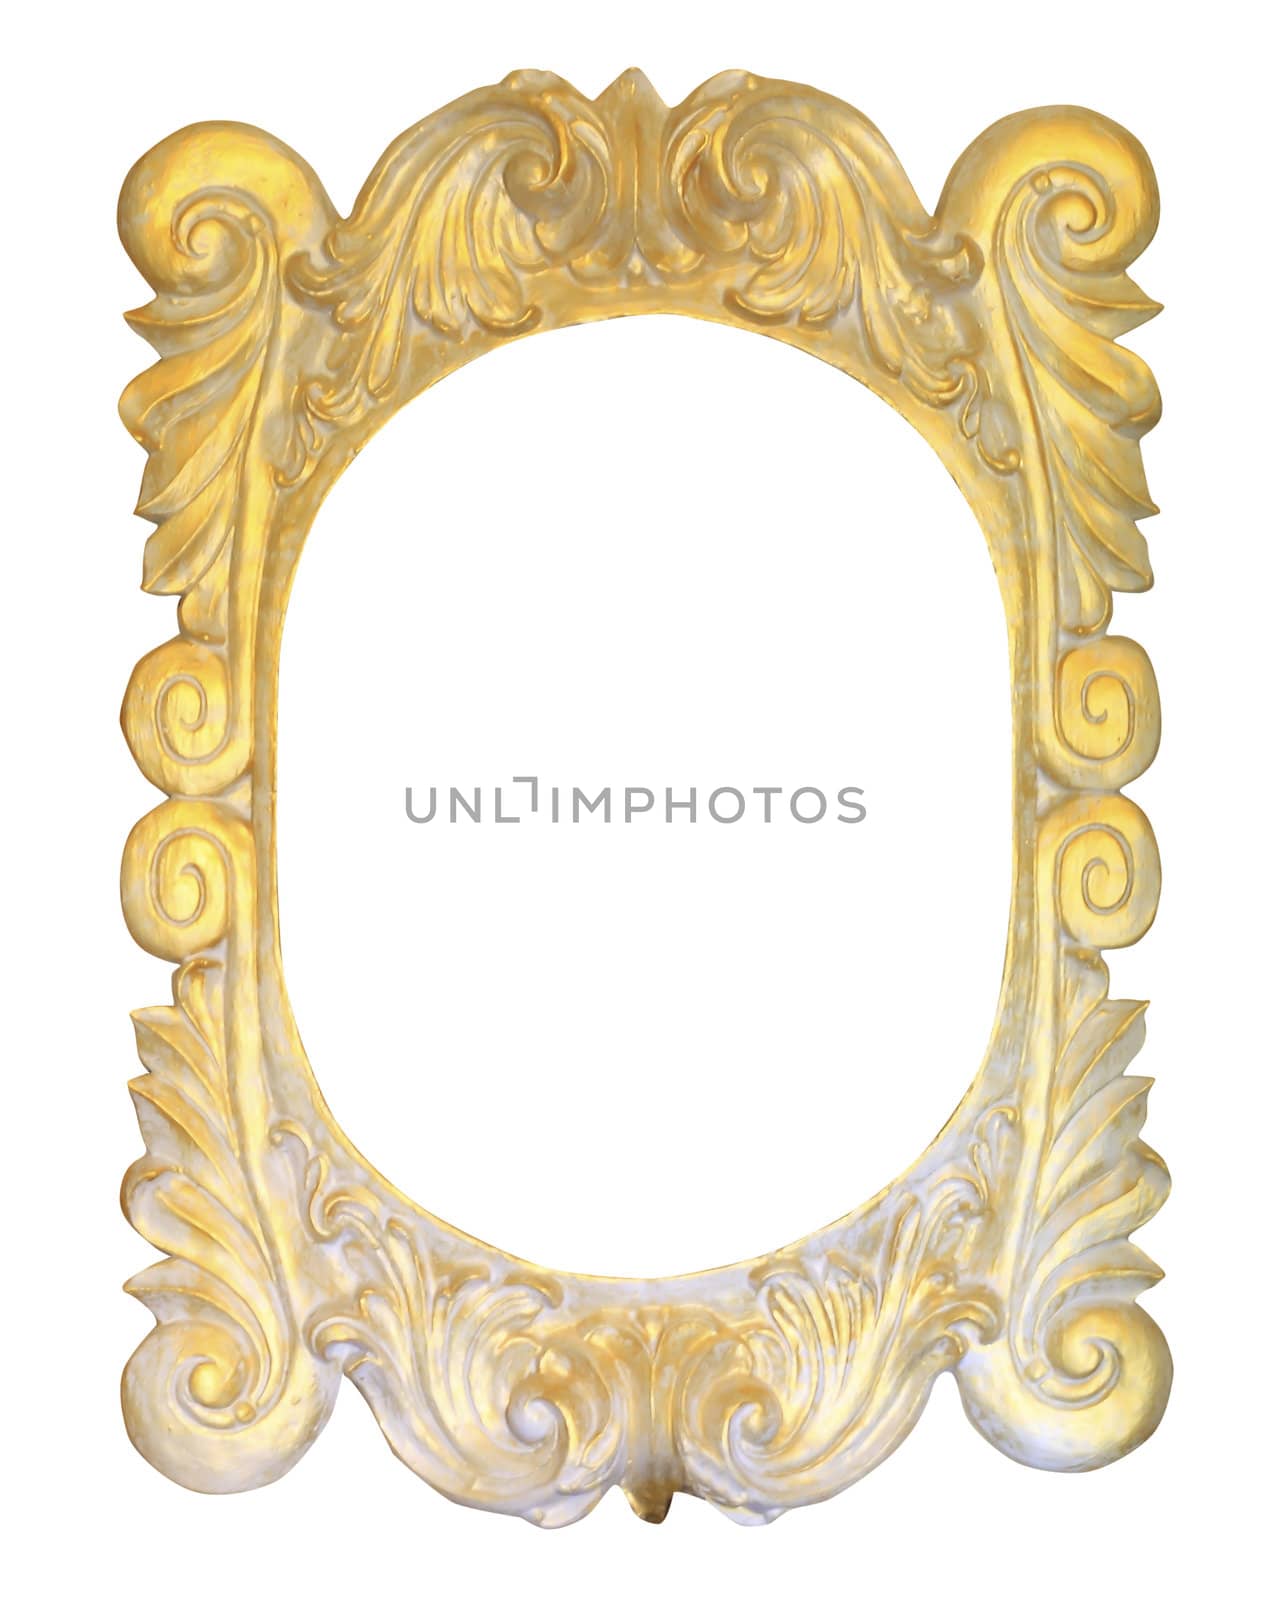 Old gold frame over white background by rufous